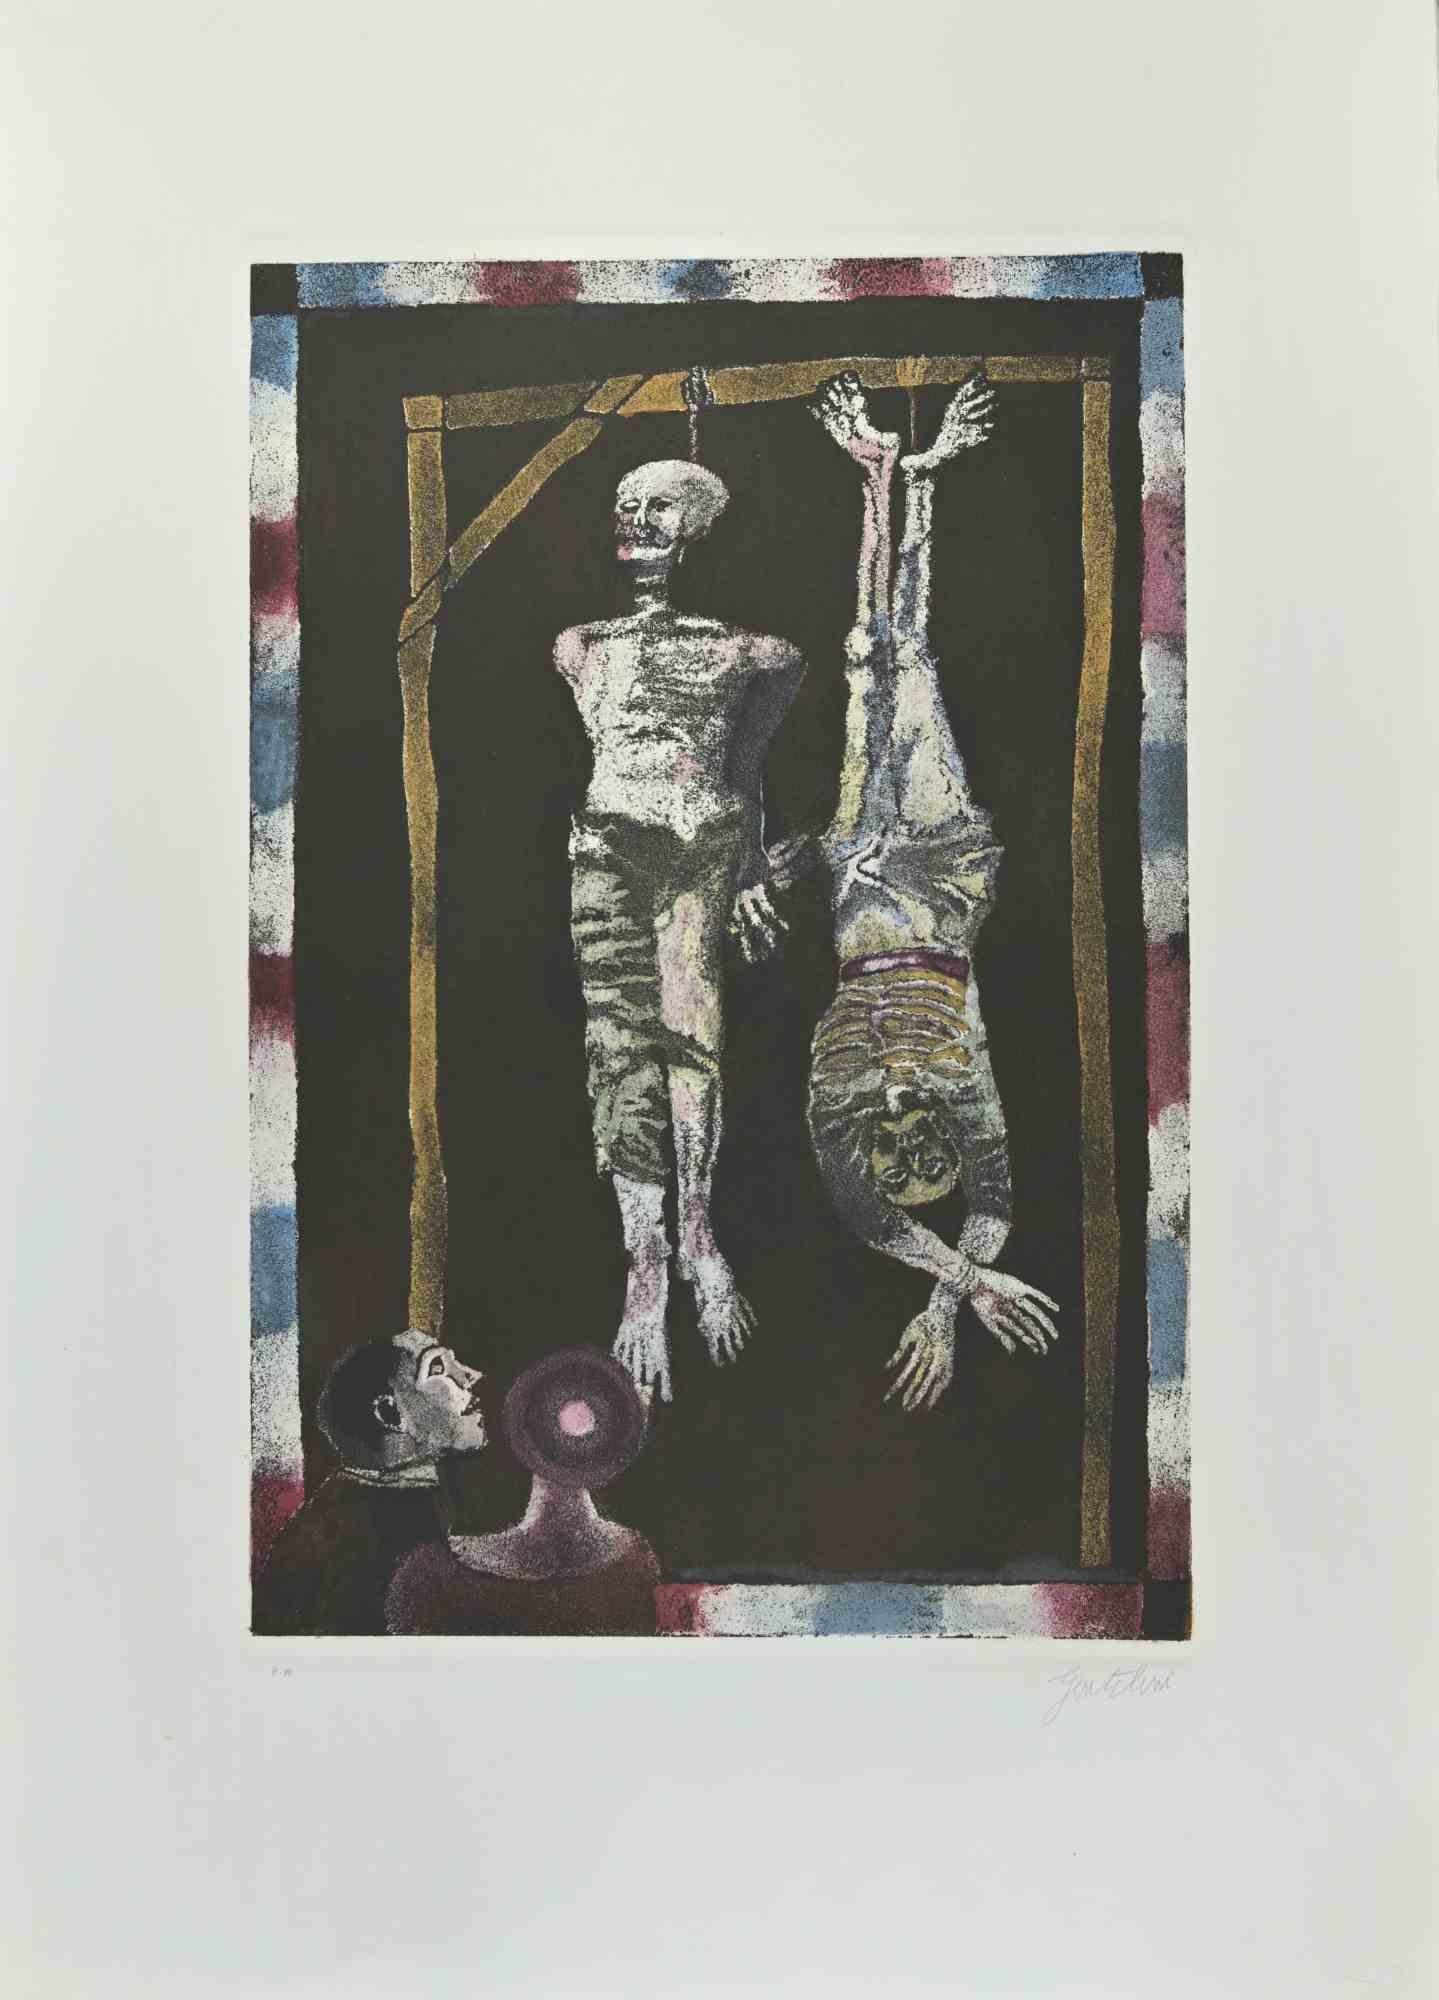  The Hanged Man - Etching and Aquatint by Franco Gentilini - 1970s